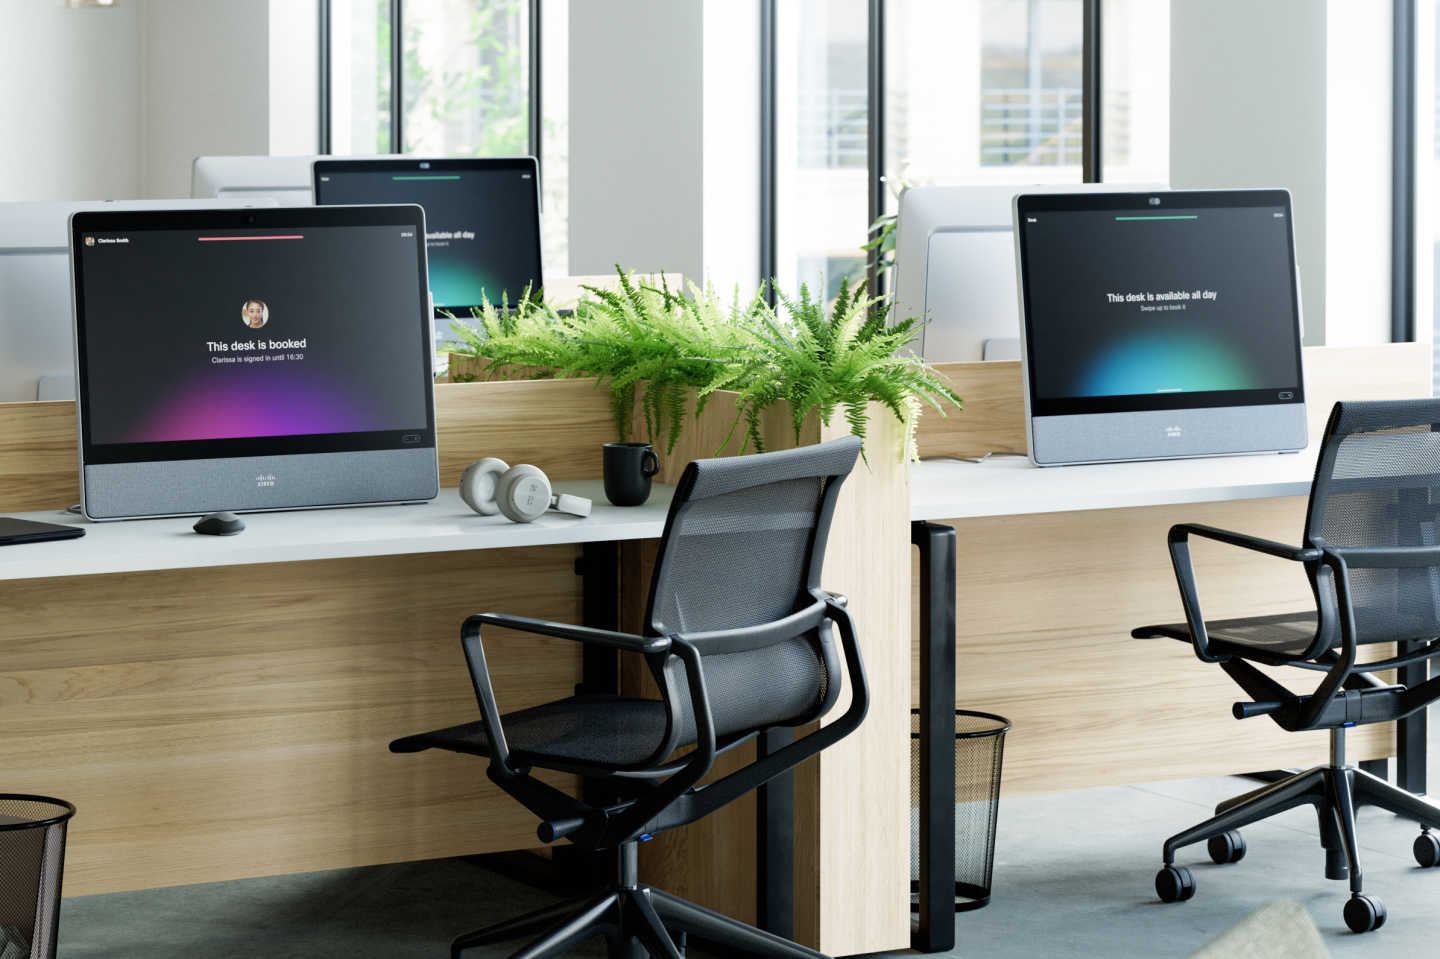 Office space containing multiple desks with Webex DeskPros. Some display w/ red-ish details stating desk is booked, others that the desk is available all day with green details in the ui